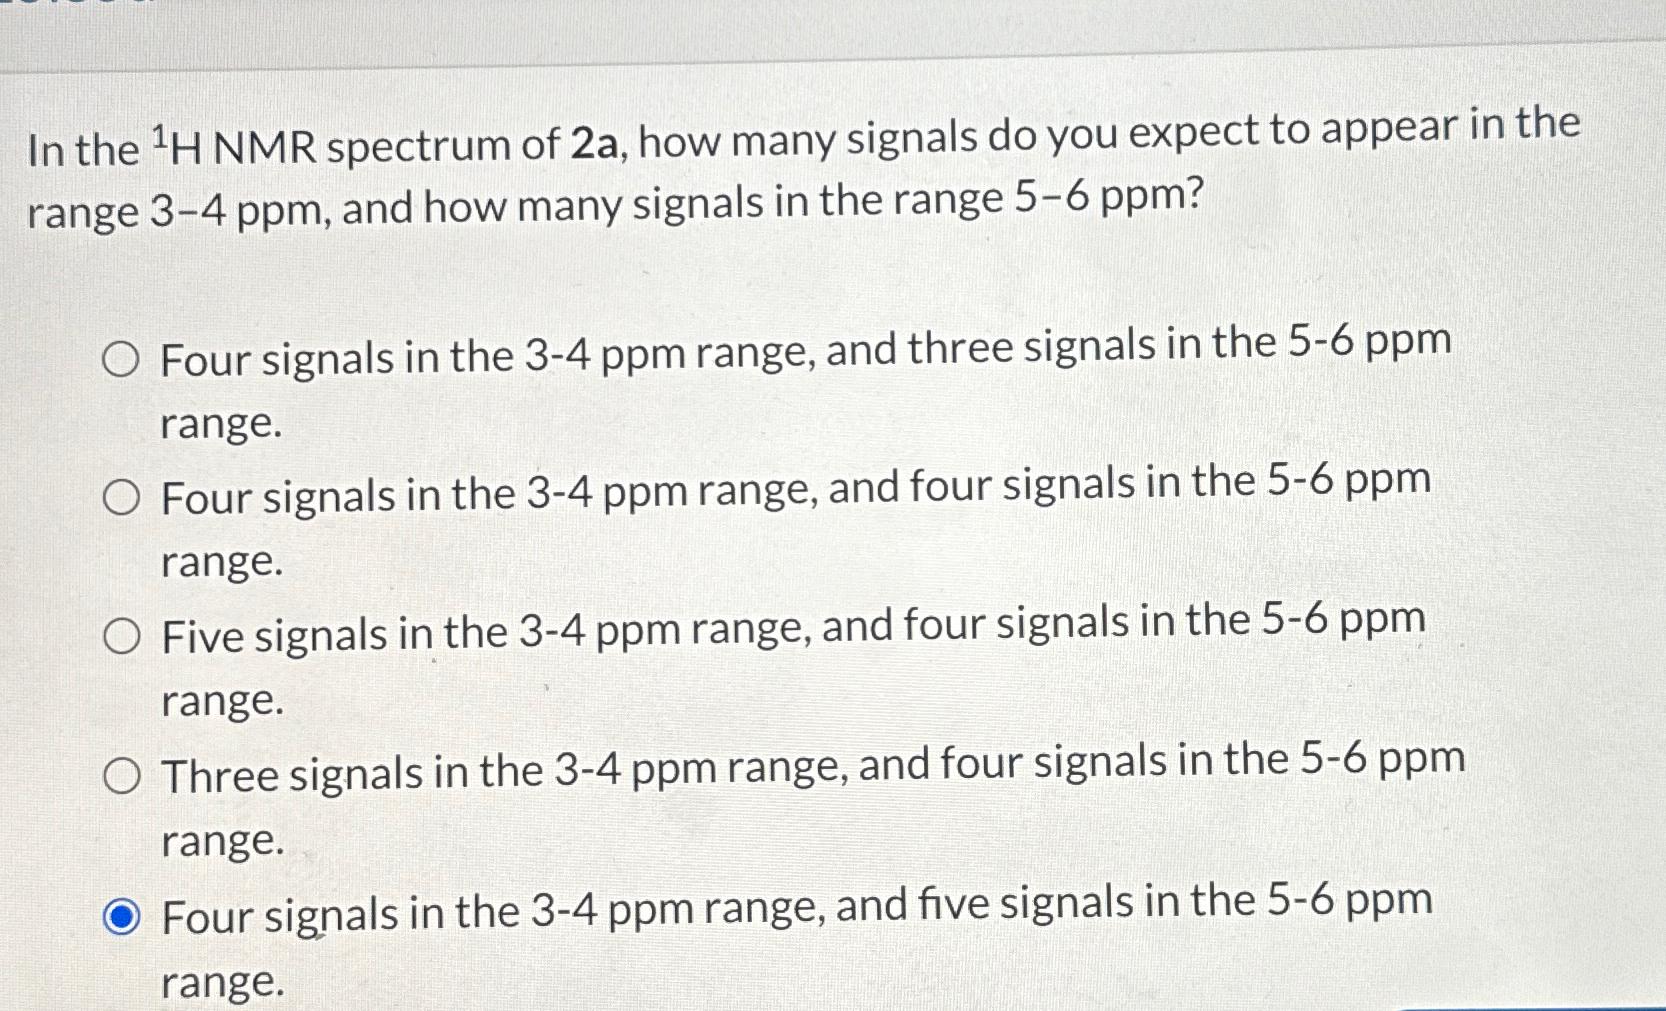 In the H NMR spectrum of 2a, how many signals do you expect to appear in the range 3-4 ppm, and how many